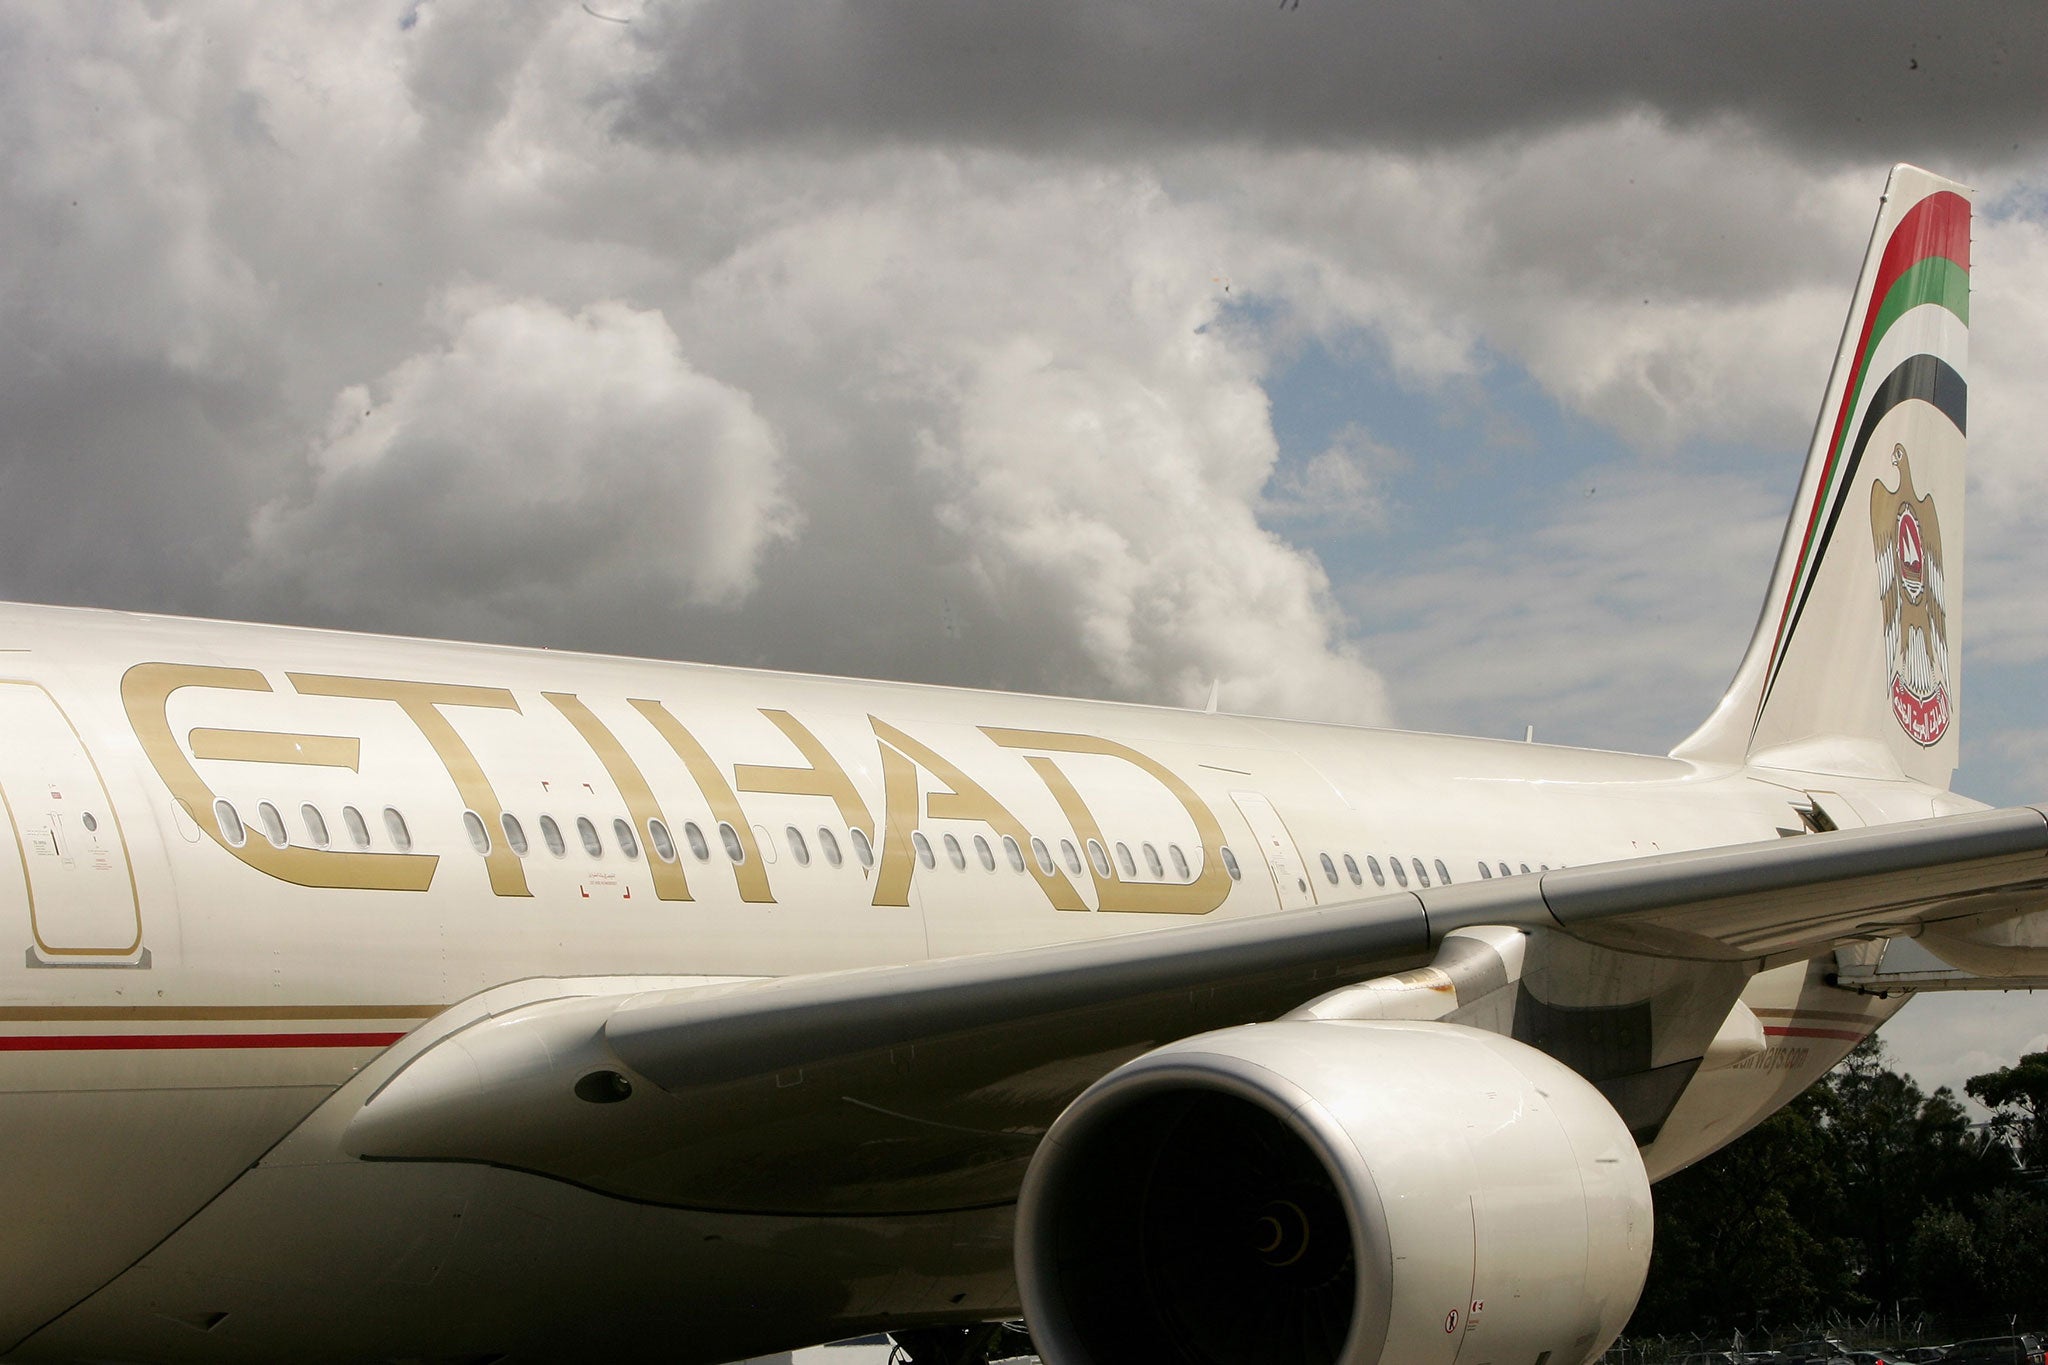 File image shows the first flight from Etihad to land in Australia in 2007. The airline has grown rapidly in recent years